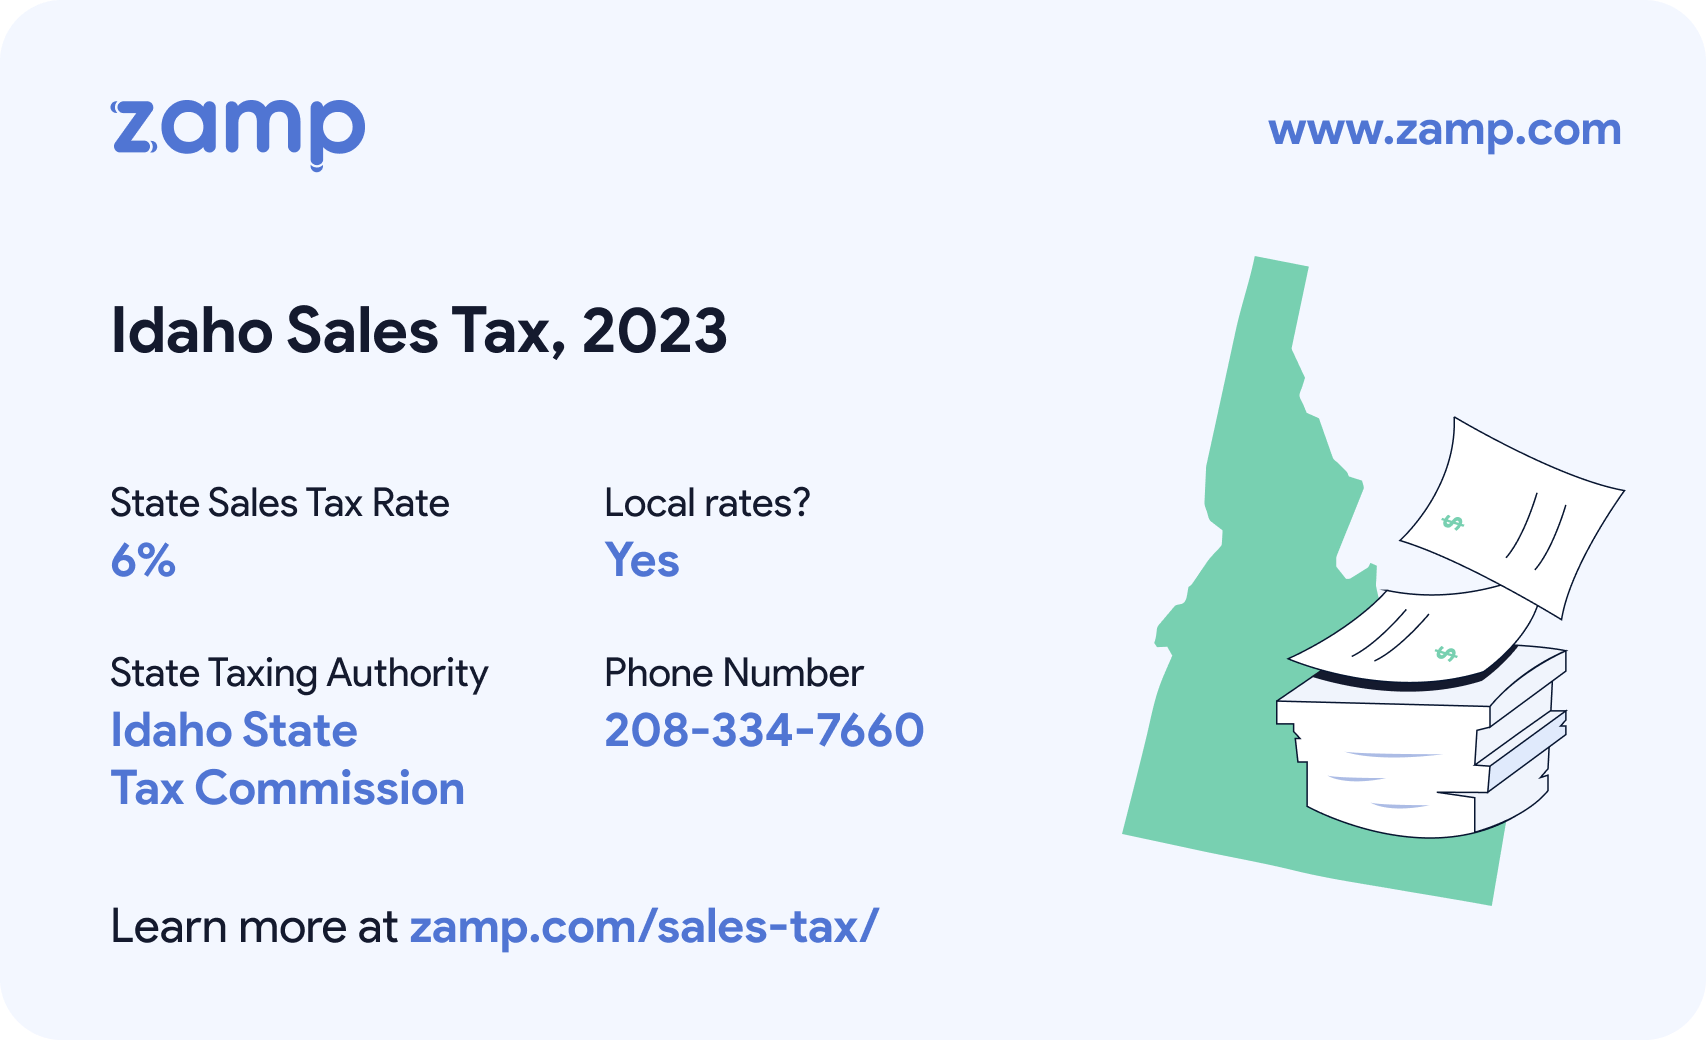 Idaho basic sales tax info for 2023 - State sales tax rate: 6%, Local rates? Yes; State Taxing Authority: Idaho State Tax Commission; and phone number 208-334-7660